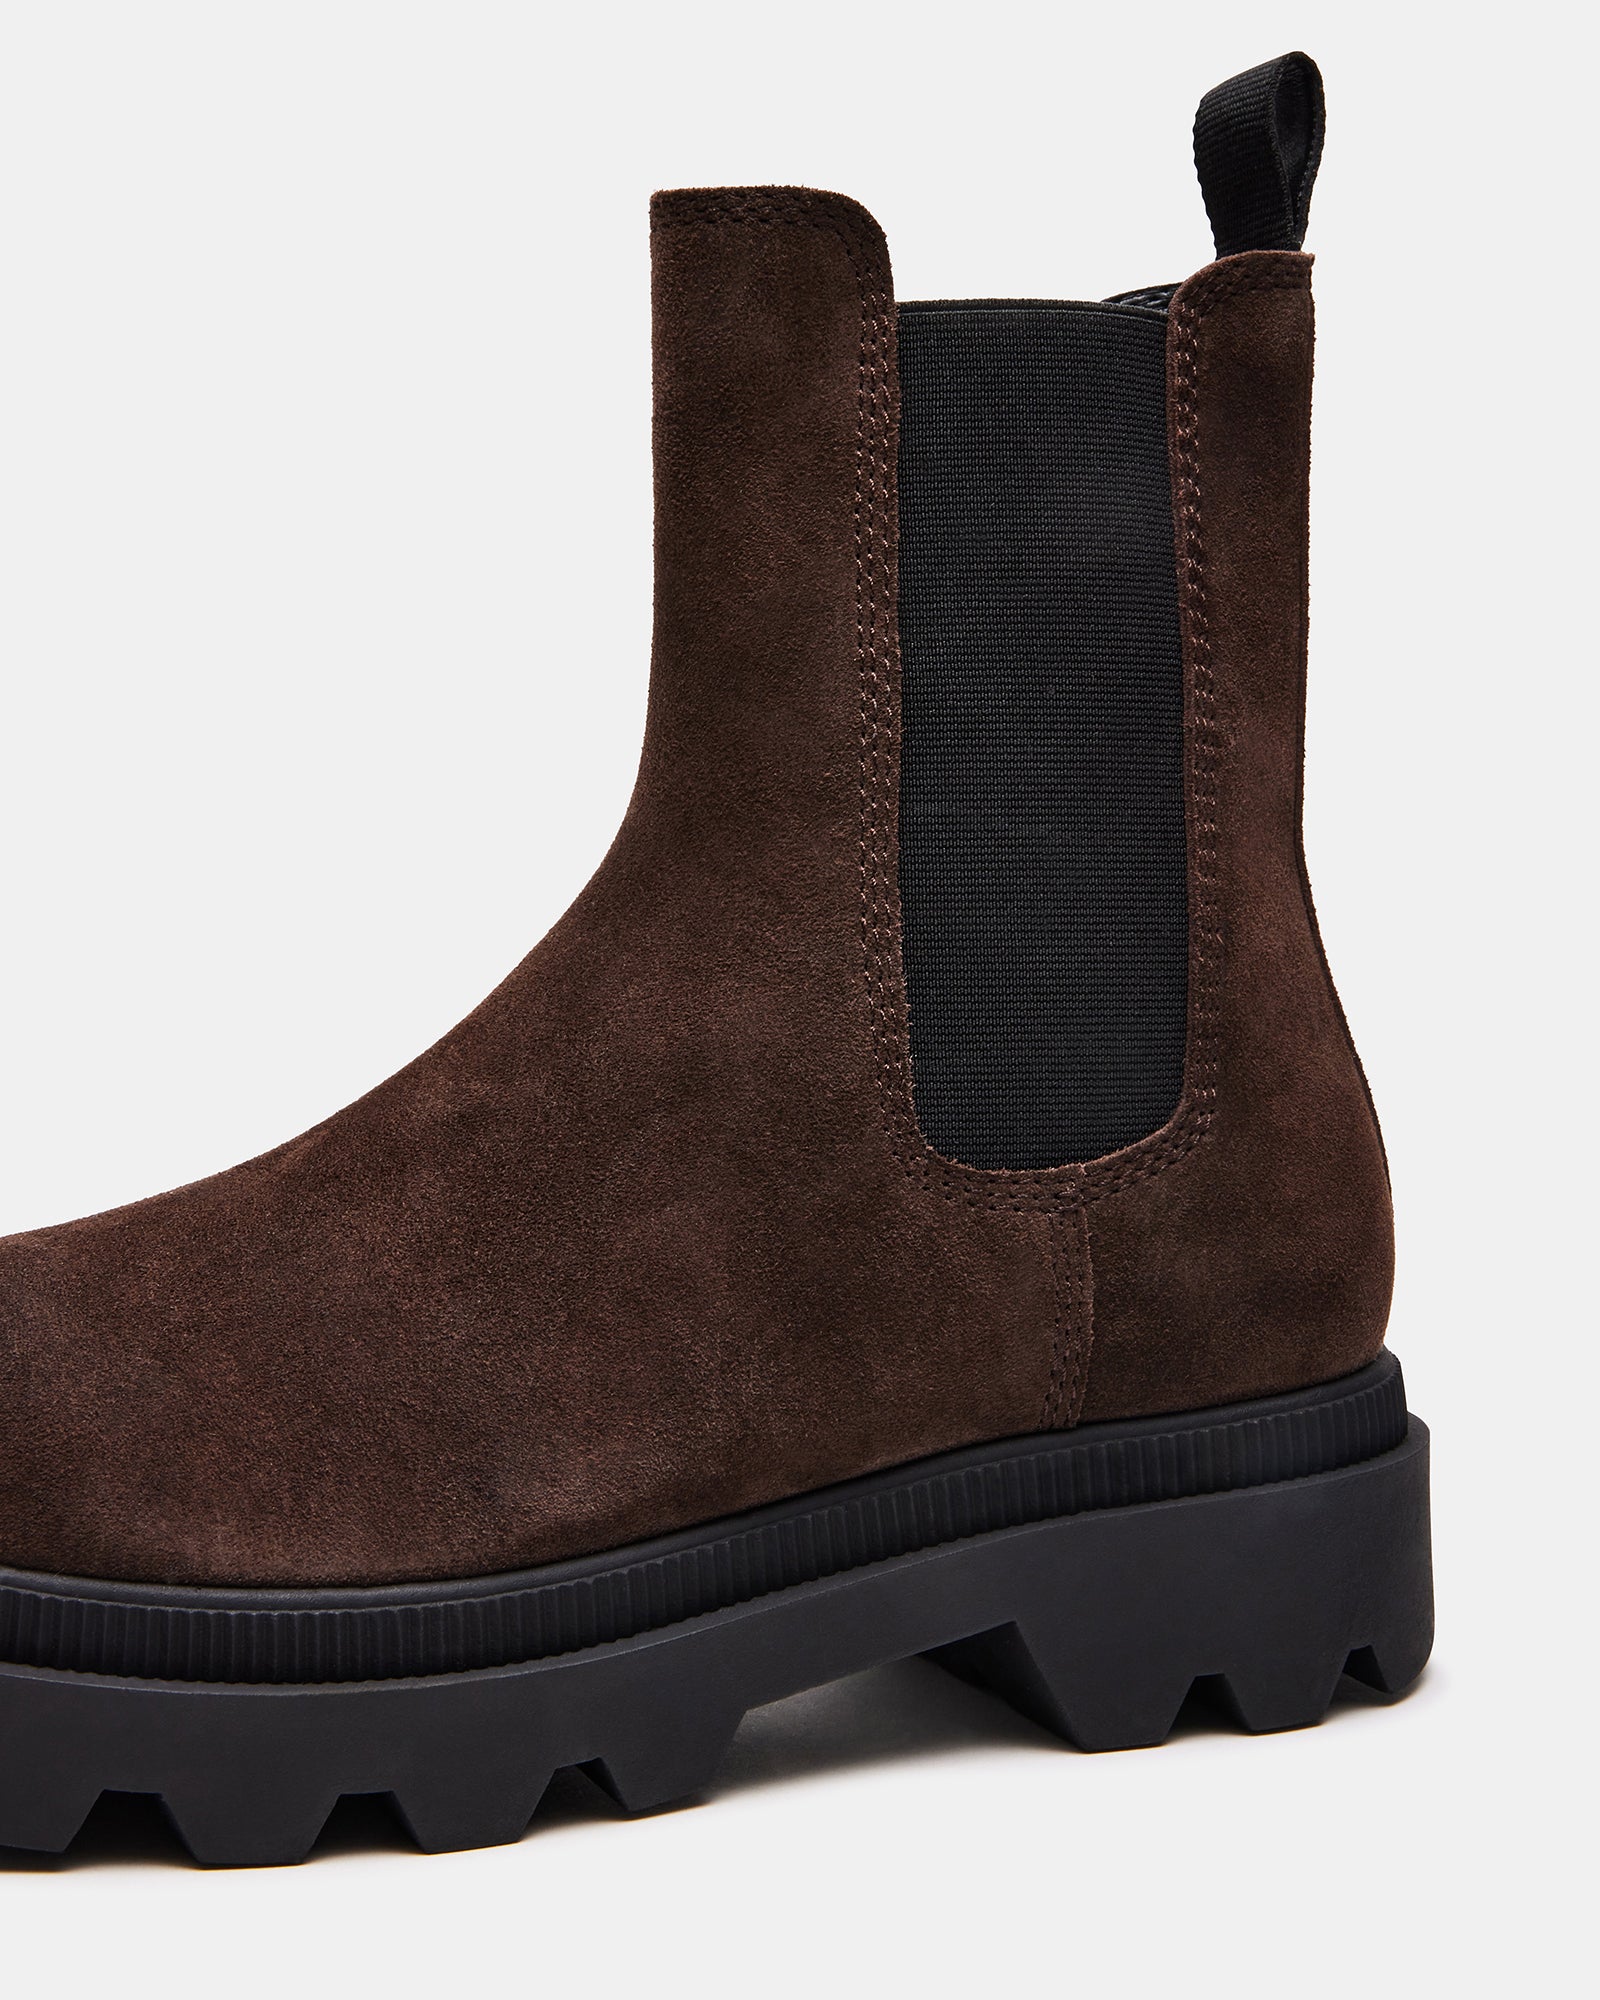 KAIN Brown Suede Lug Sole Ankle Boot | Men's Boots – Steve Madden